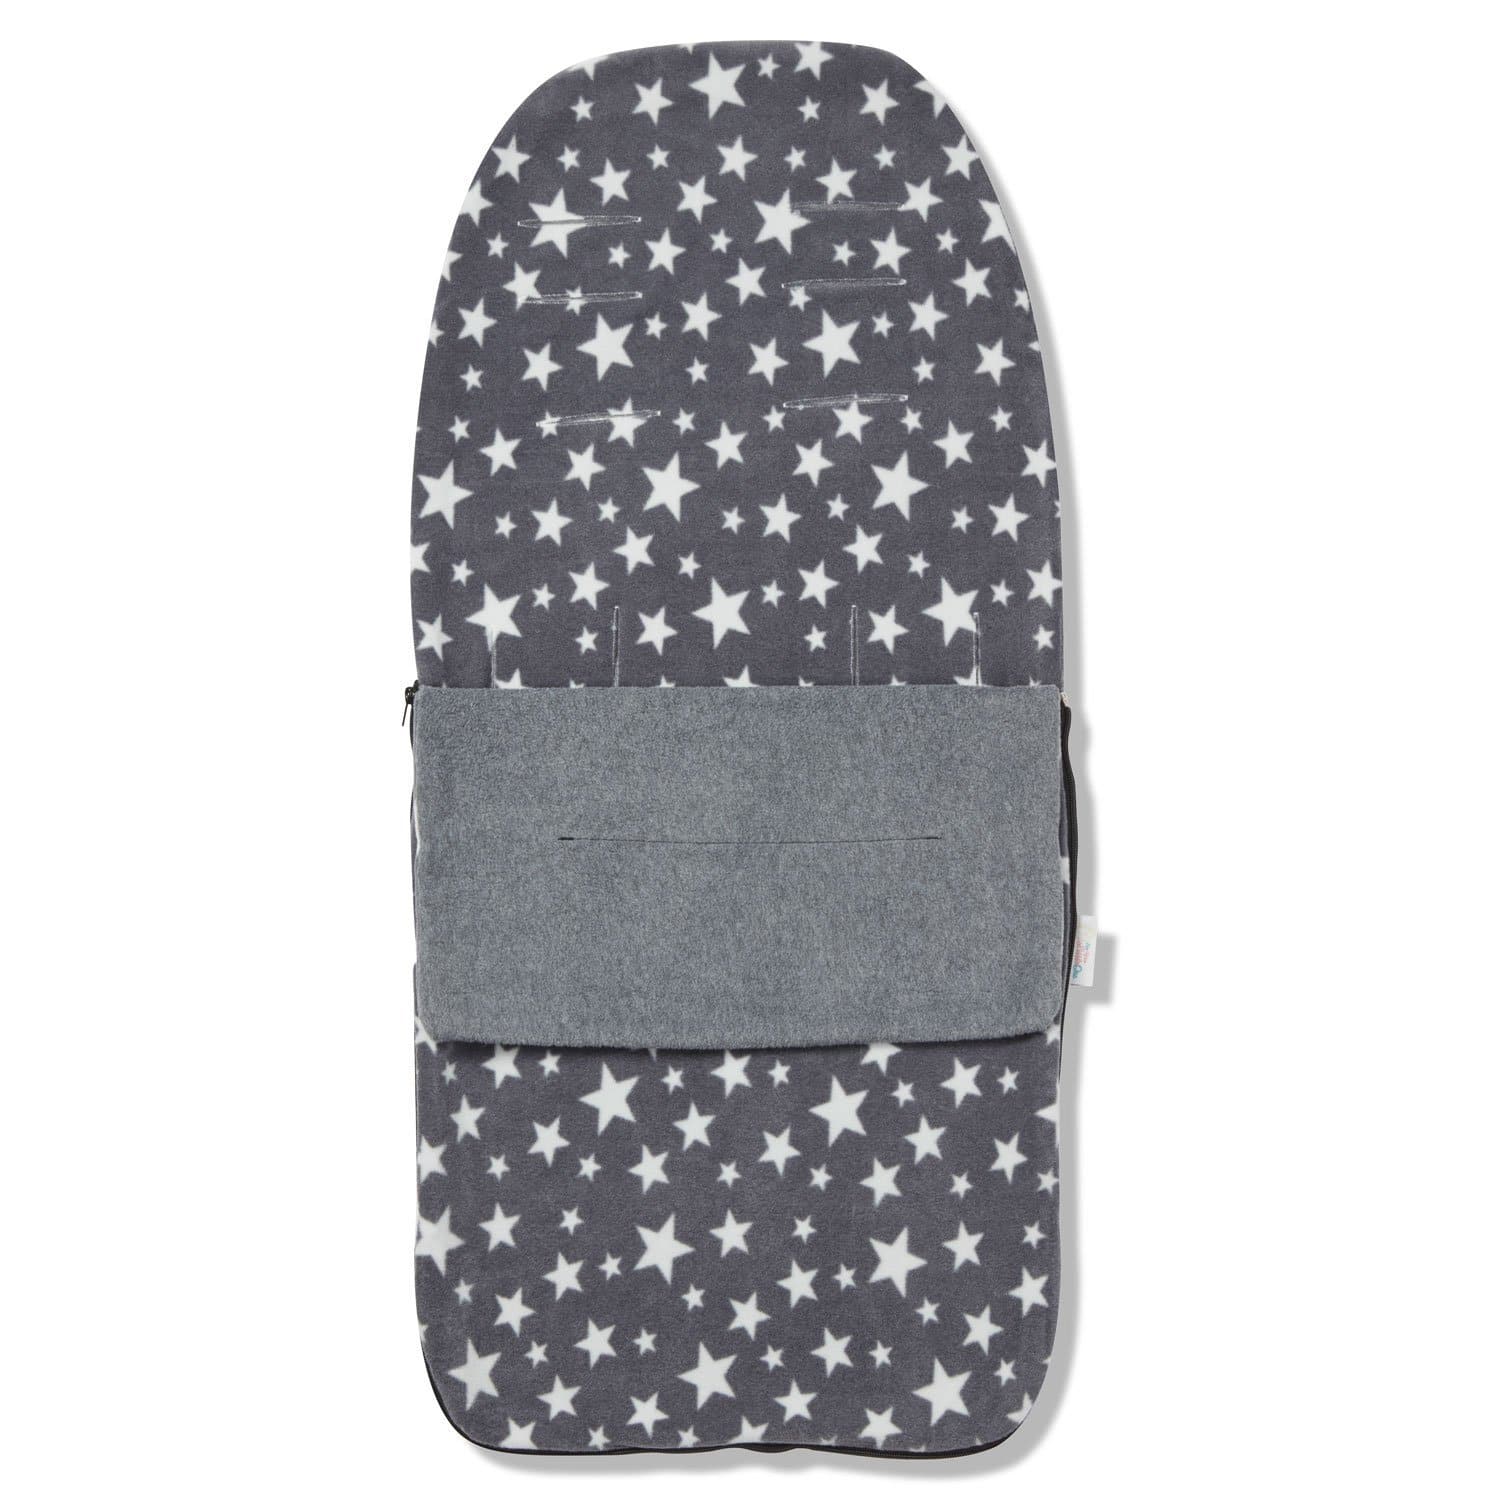 Snuggle Summer Footmuff Compatible with BabyDan - For Your Little One